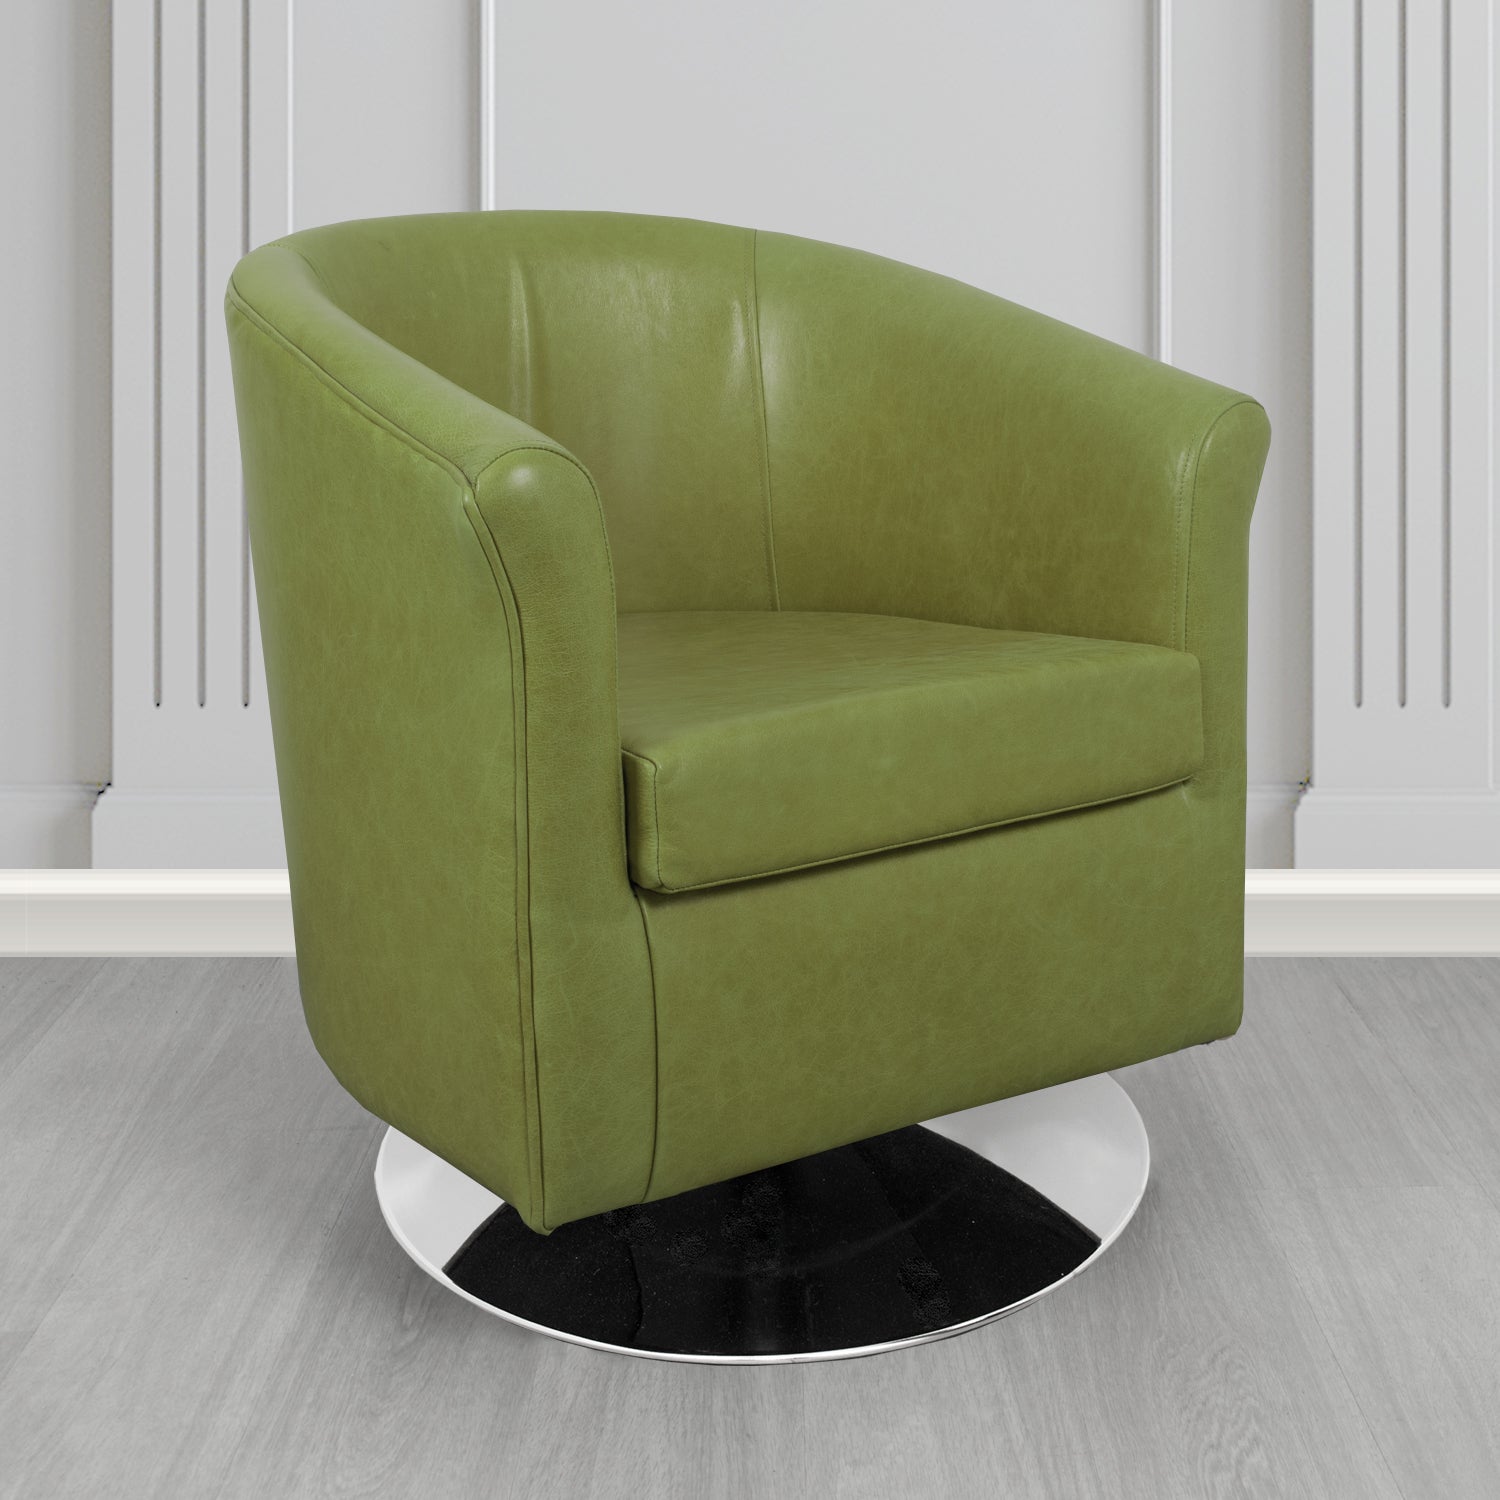 Tuscany Swivel Tub Chair in Crib 5 Old English Olive Genuine Leather - The Tub Chair Shop